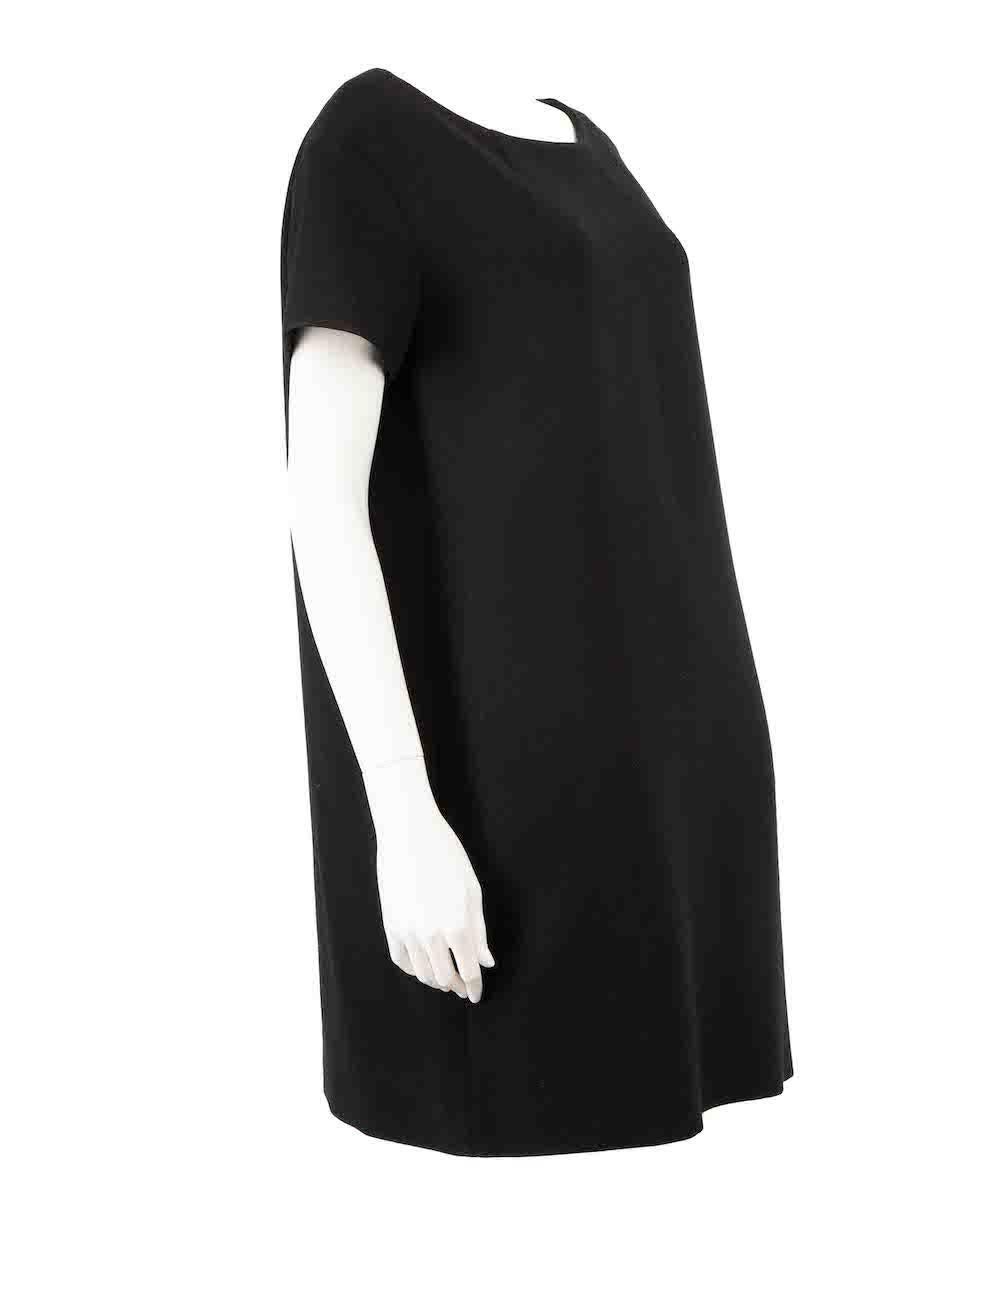 CONDITION is Very good. Minimal wear to dress is evident. Minimal wear to rear sleeve and under arms with minor pilling on this used Sofie D'Hoore designer resale item.
 
 
 
 Details
 
 
 Black
 
 Wool
 
 Shift dress
 
 Knee length
 
 Round